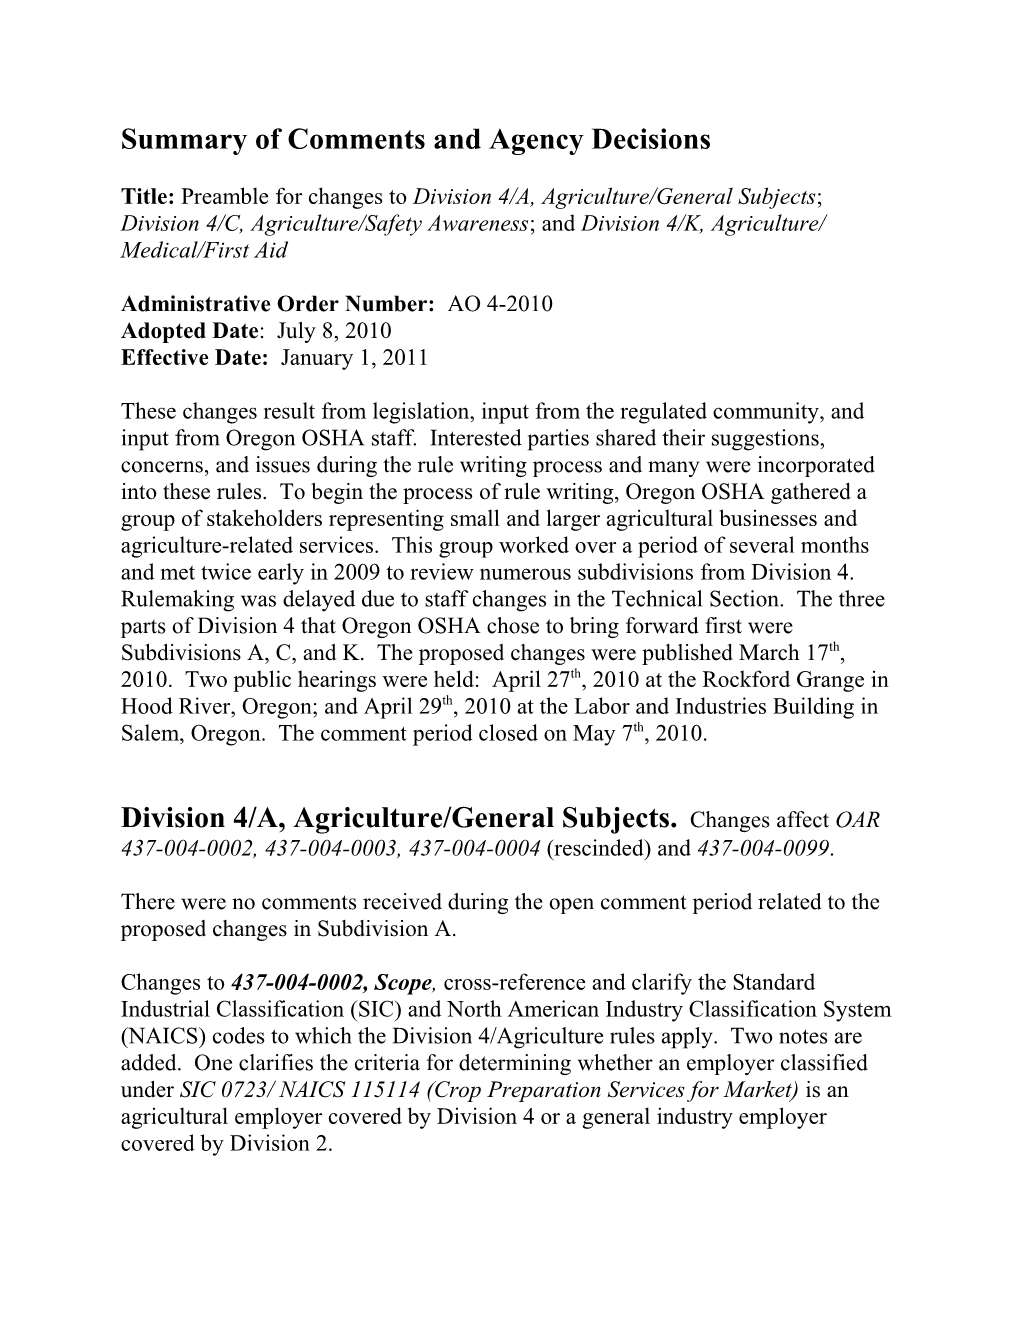 Summary of Comments and Agency Decisions Regarding Proposed Changes to Division 4 Agriculture